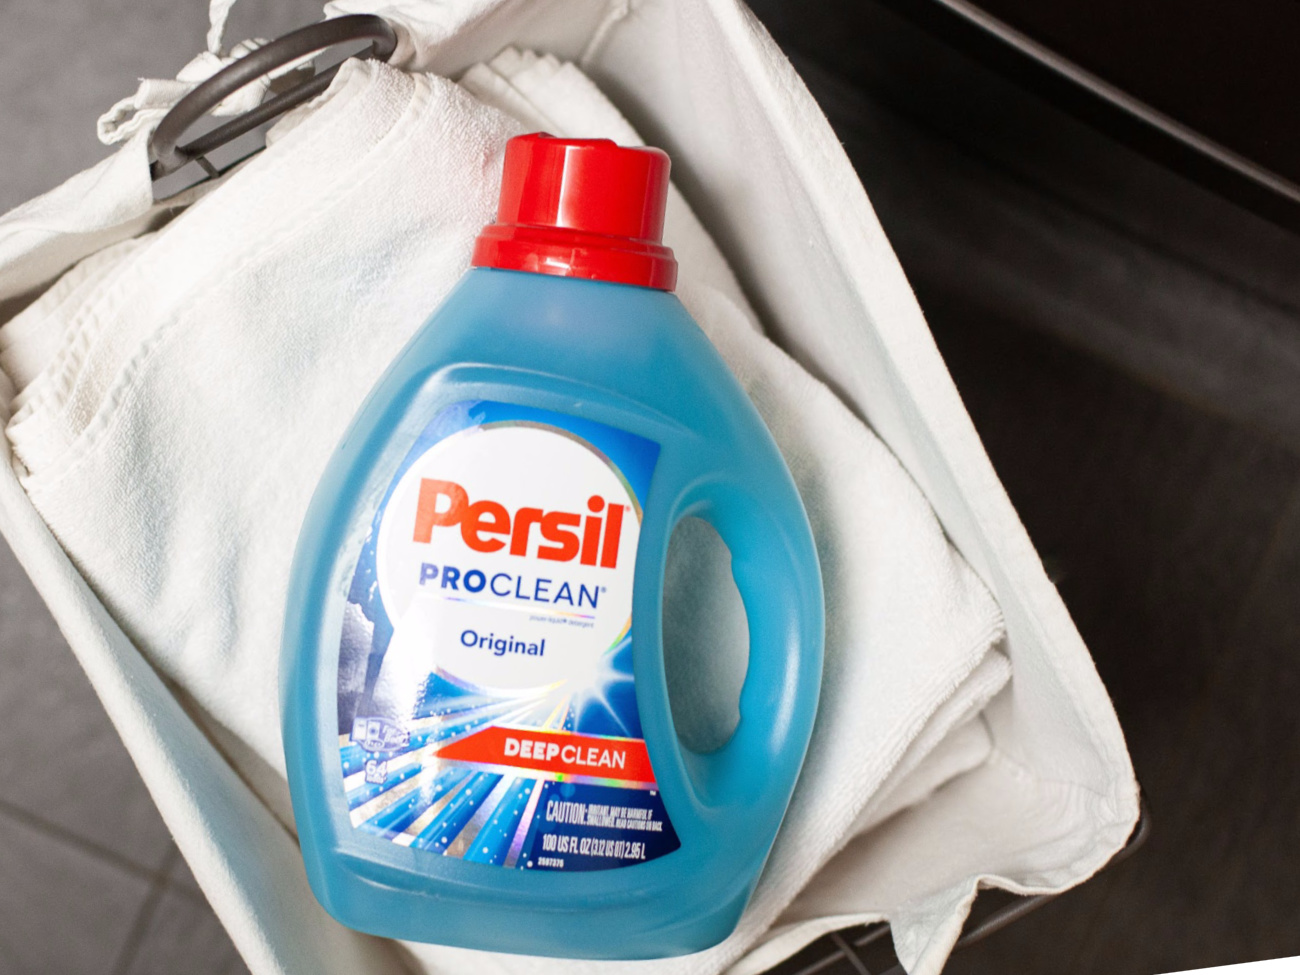 Persil Laundry Detergent Just $10.99 At Kroger